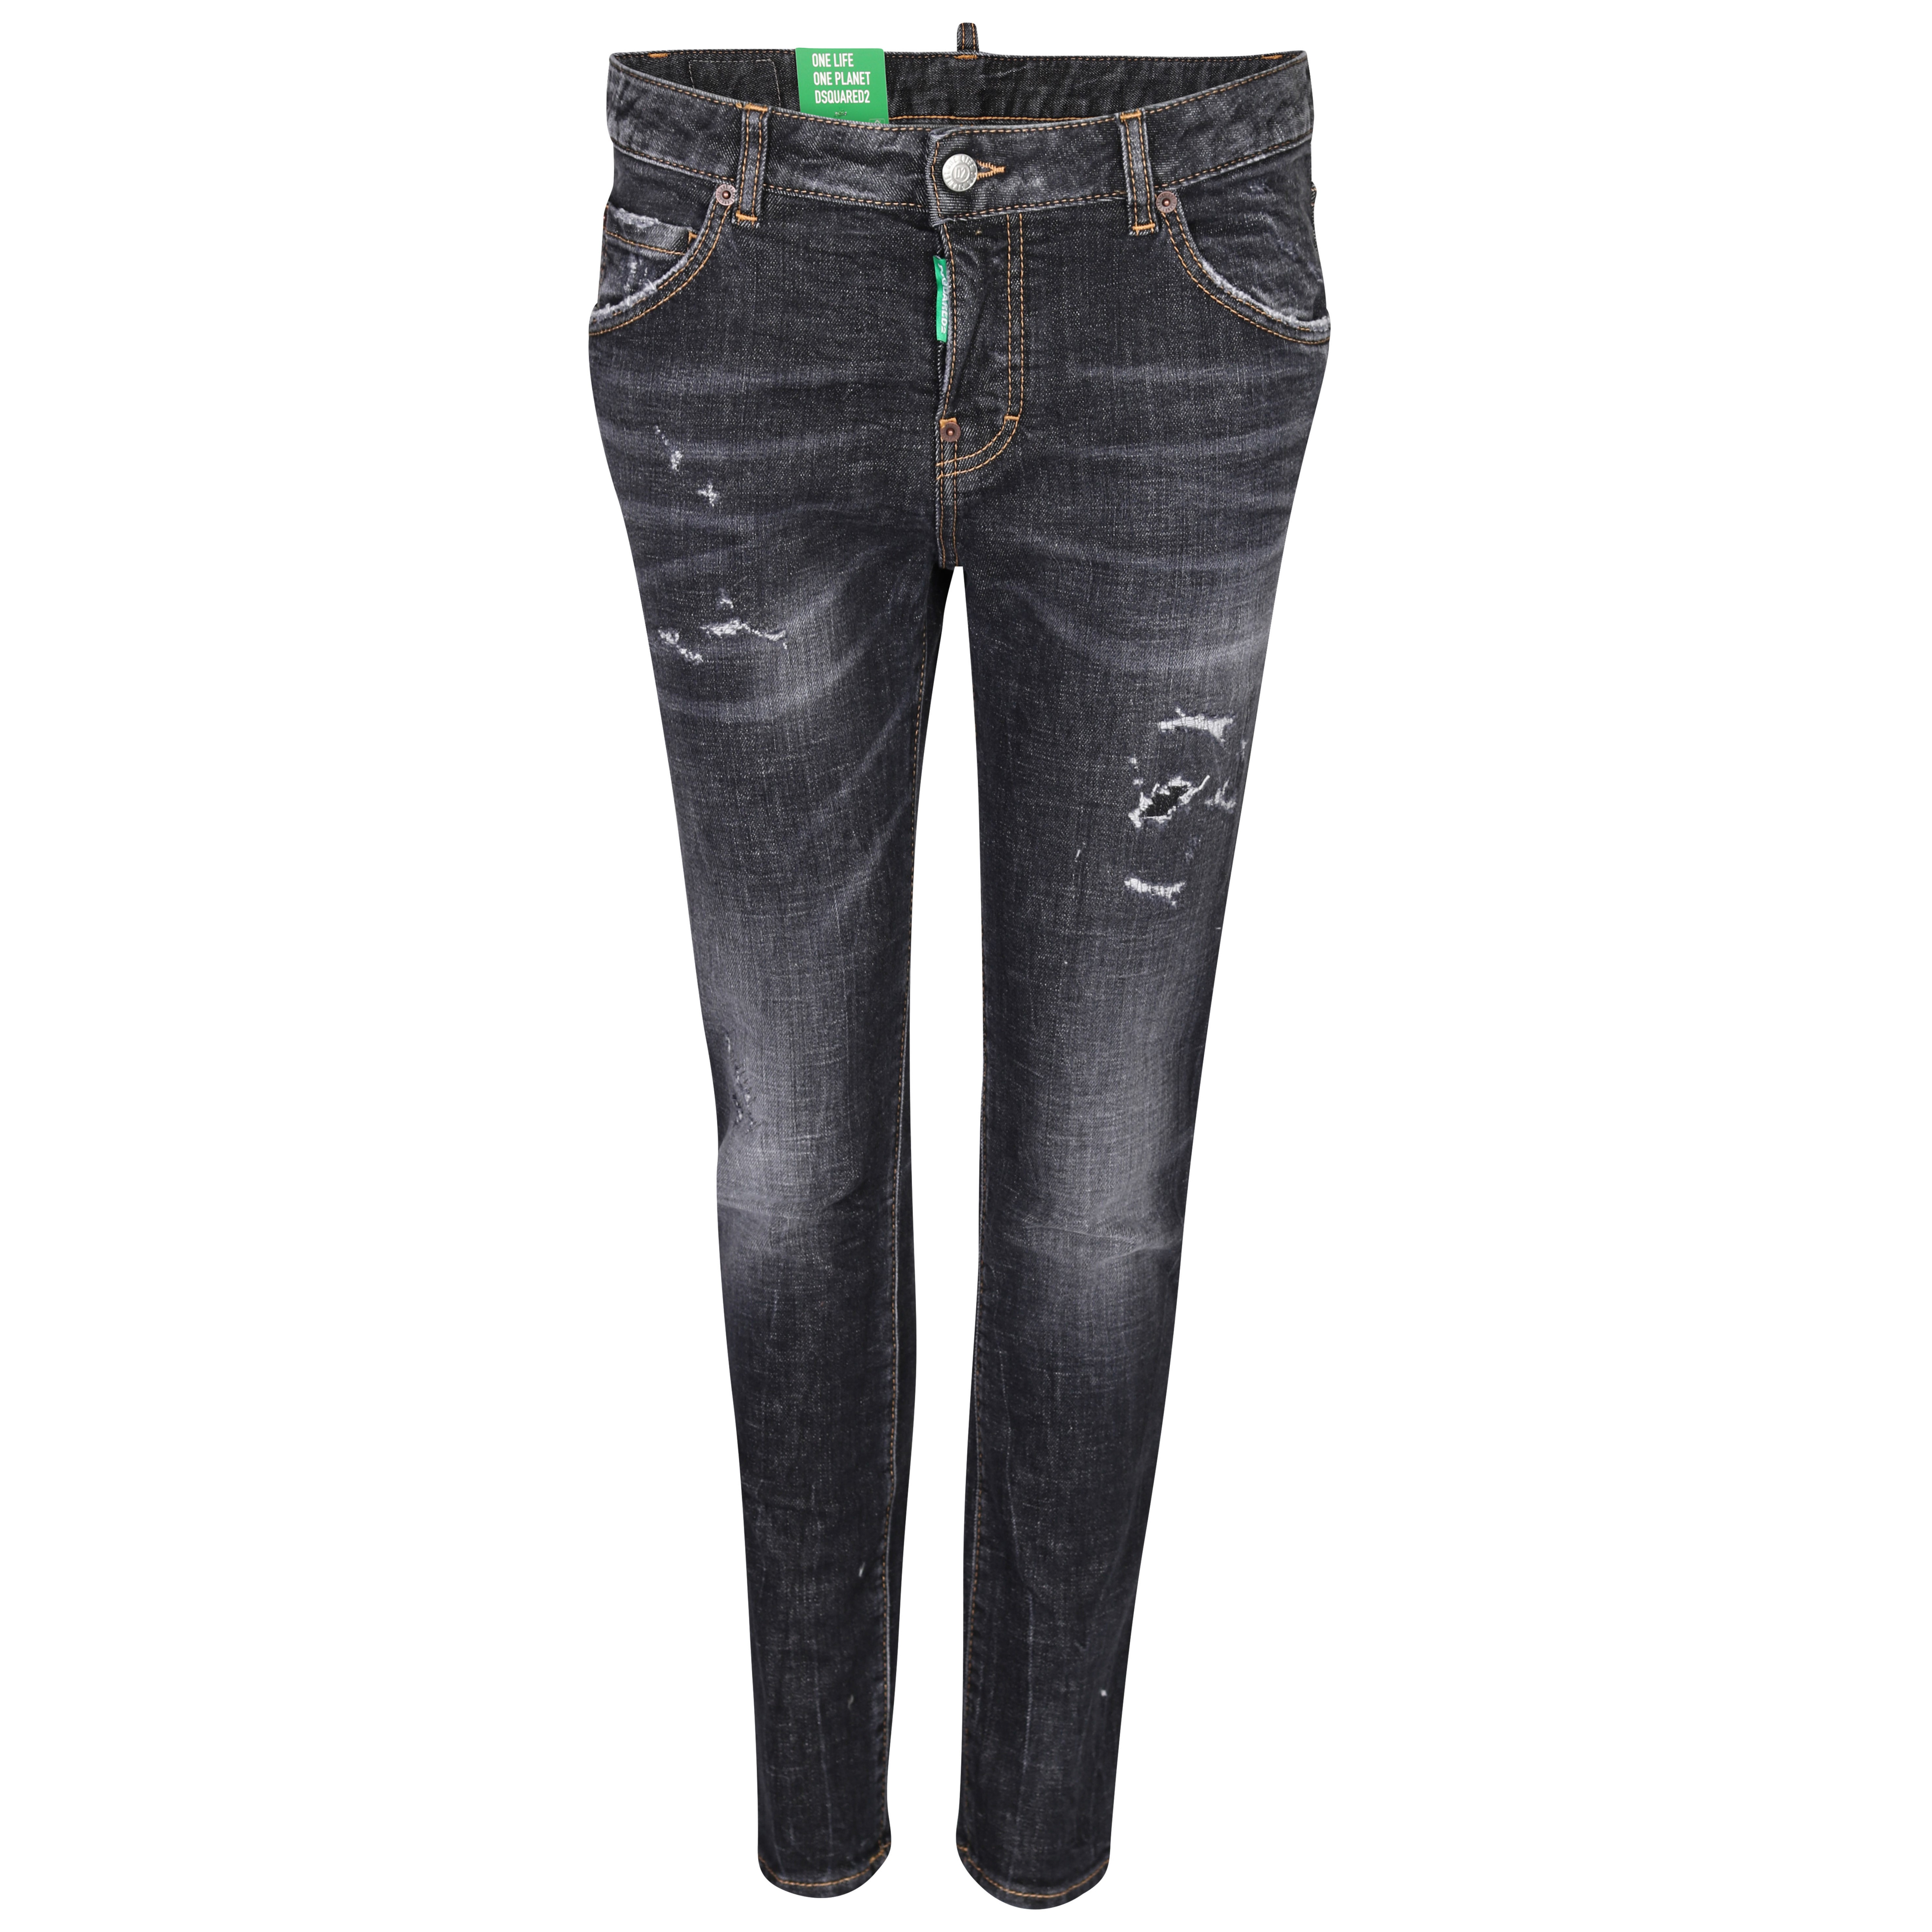 DSQUARED2 Green Label Cool Girl Jeans in Washed Black